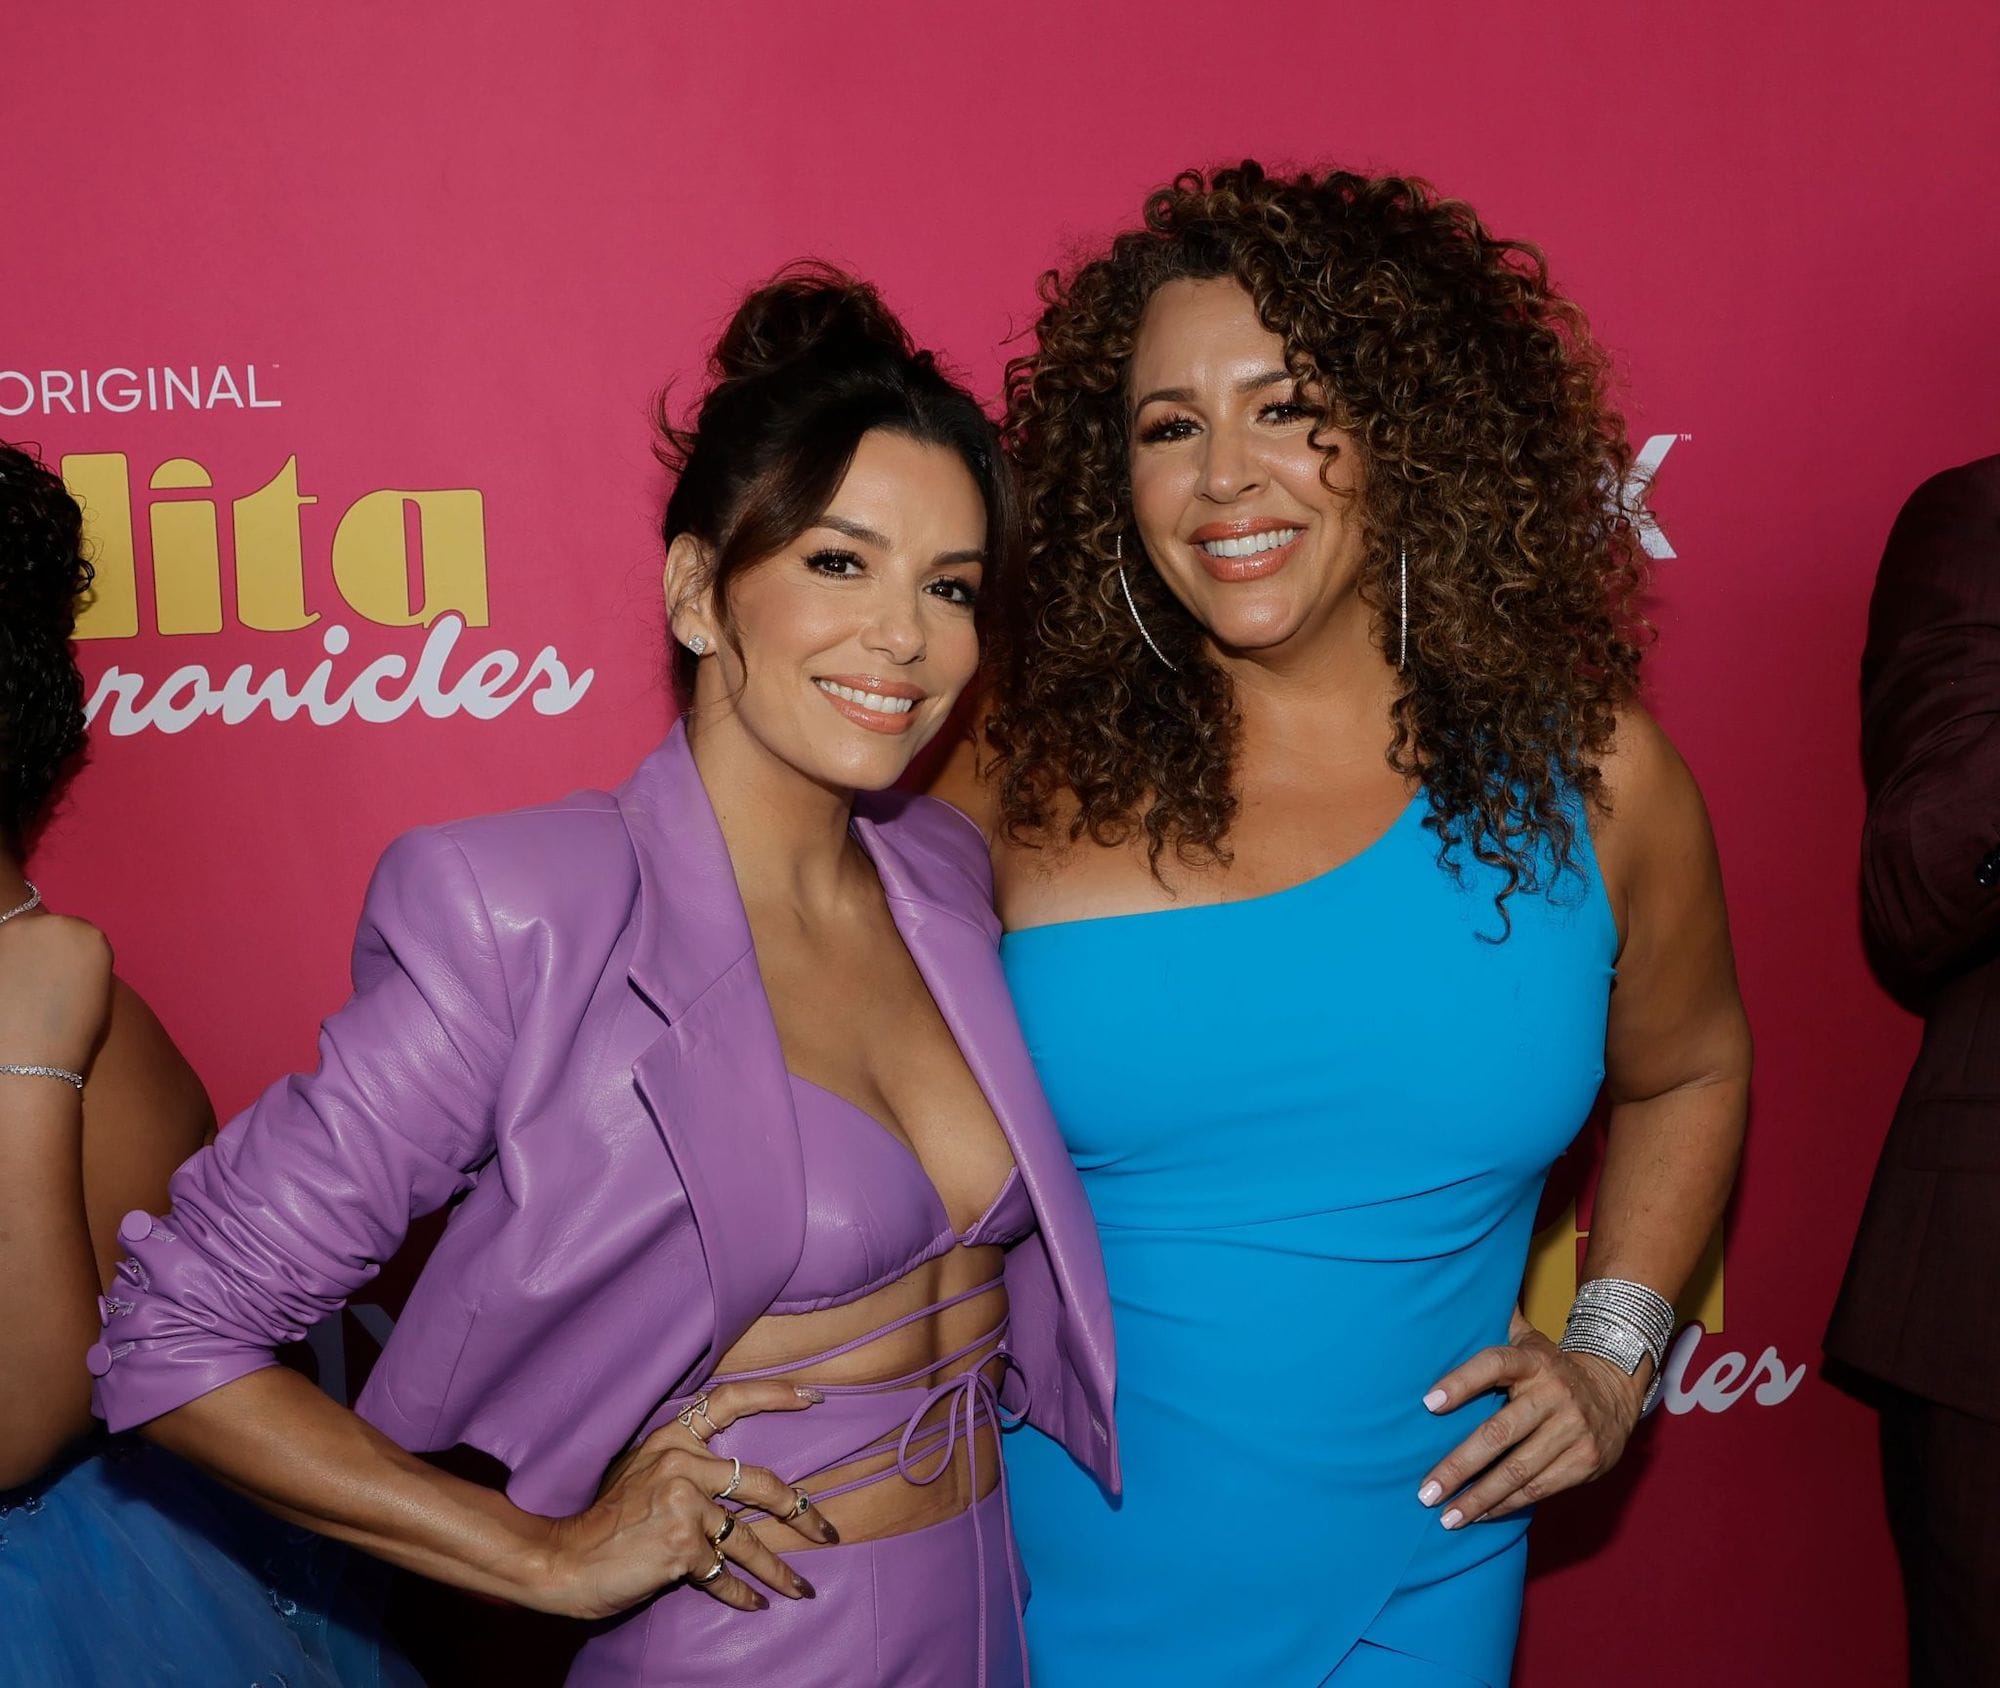 Eva Longoria and Diana Maria Riva on the red carpet at the premiere of Gordita Chronicles.